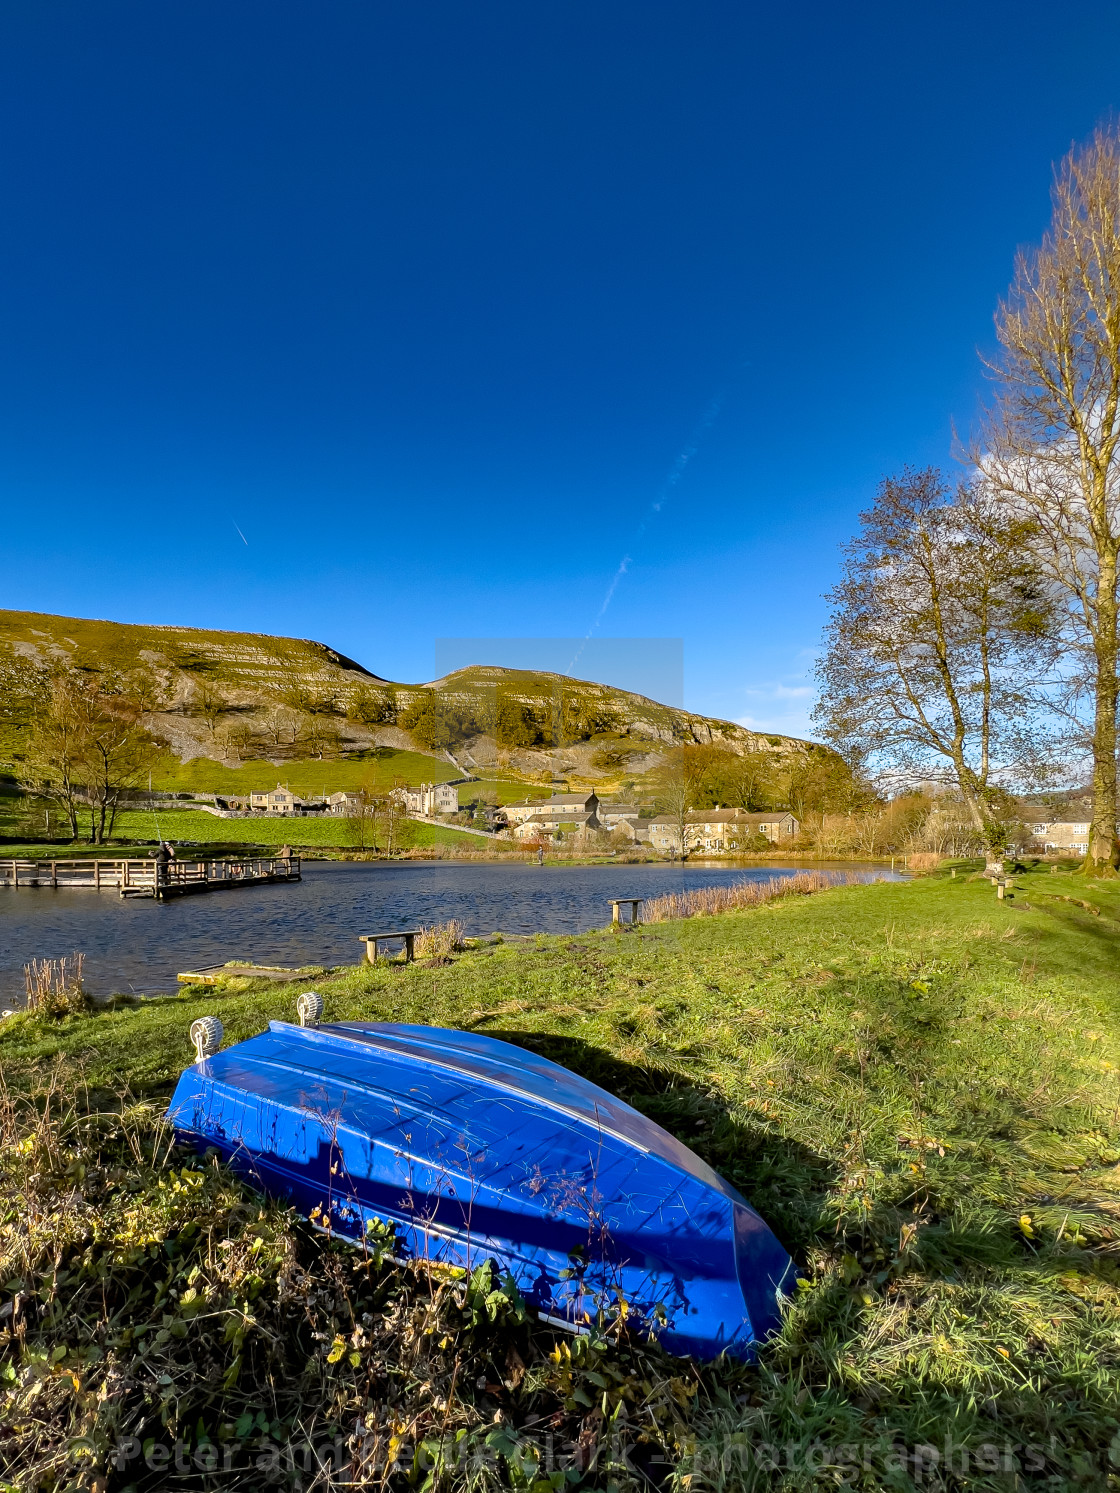 "Kilnsey Park Fly Fishing Lake and Crag, Kilnsey, Upper Wharfedale." stock image